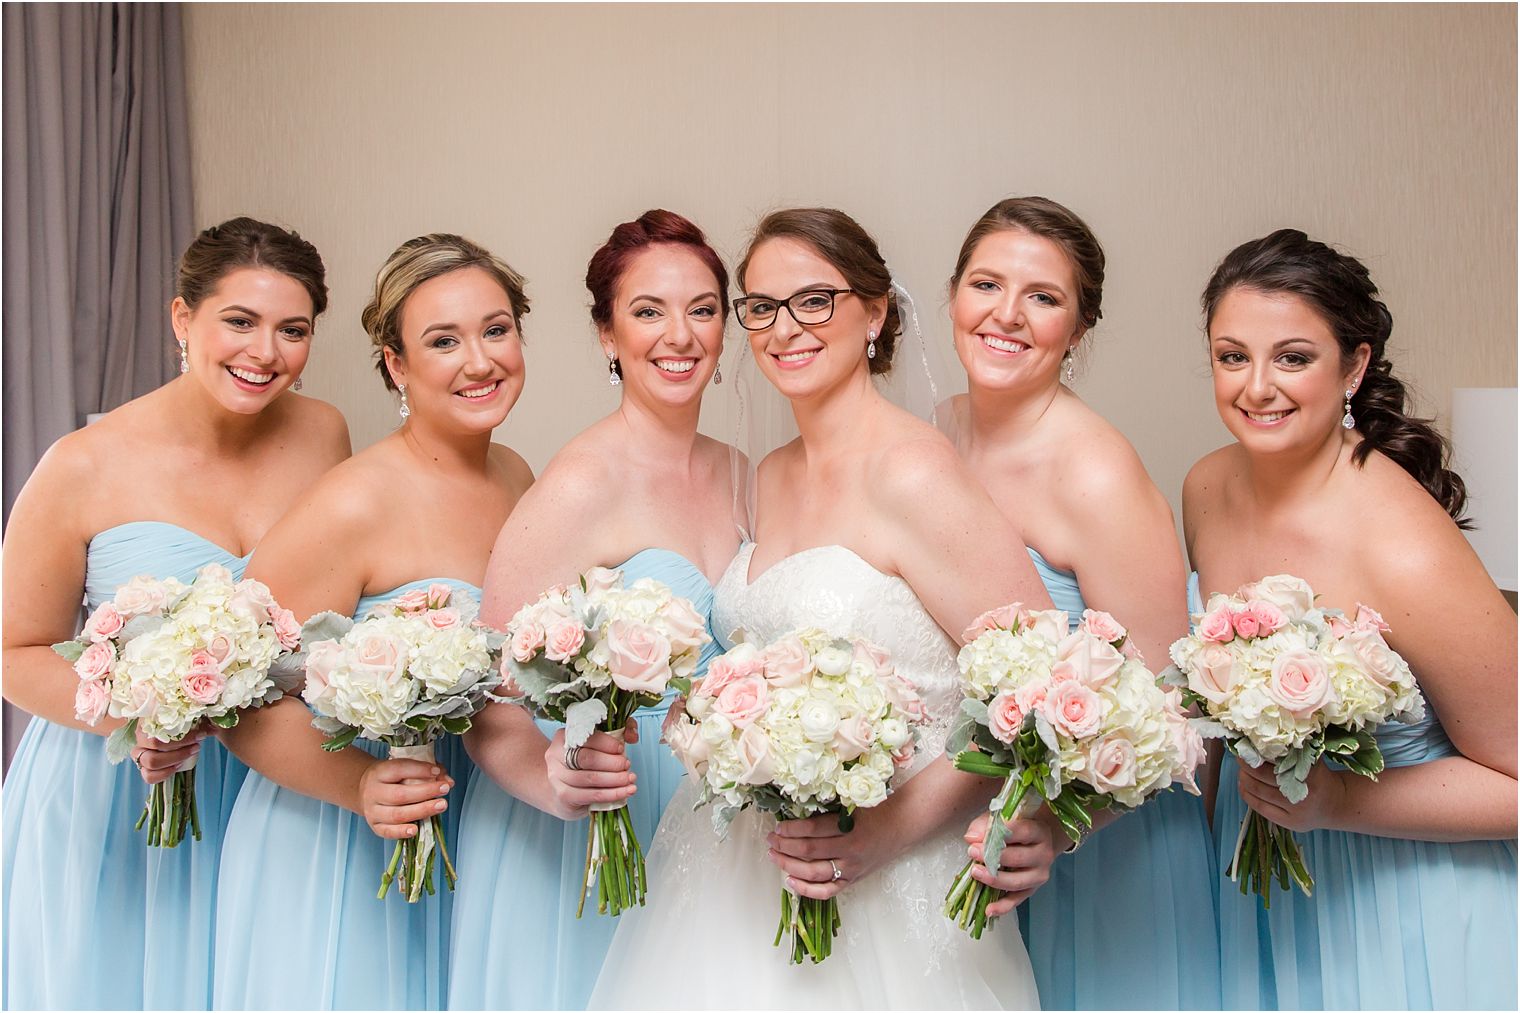 Bridesmaids with bouquets by Monday Morning Flower & Balloon Co.